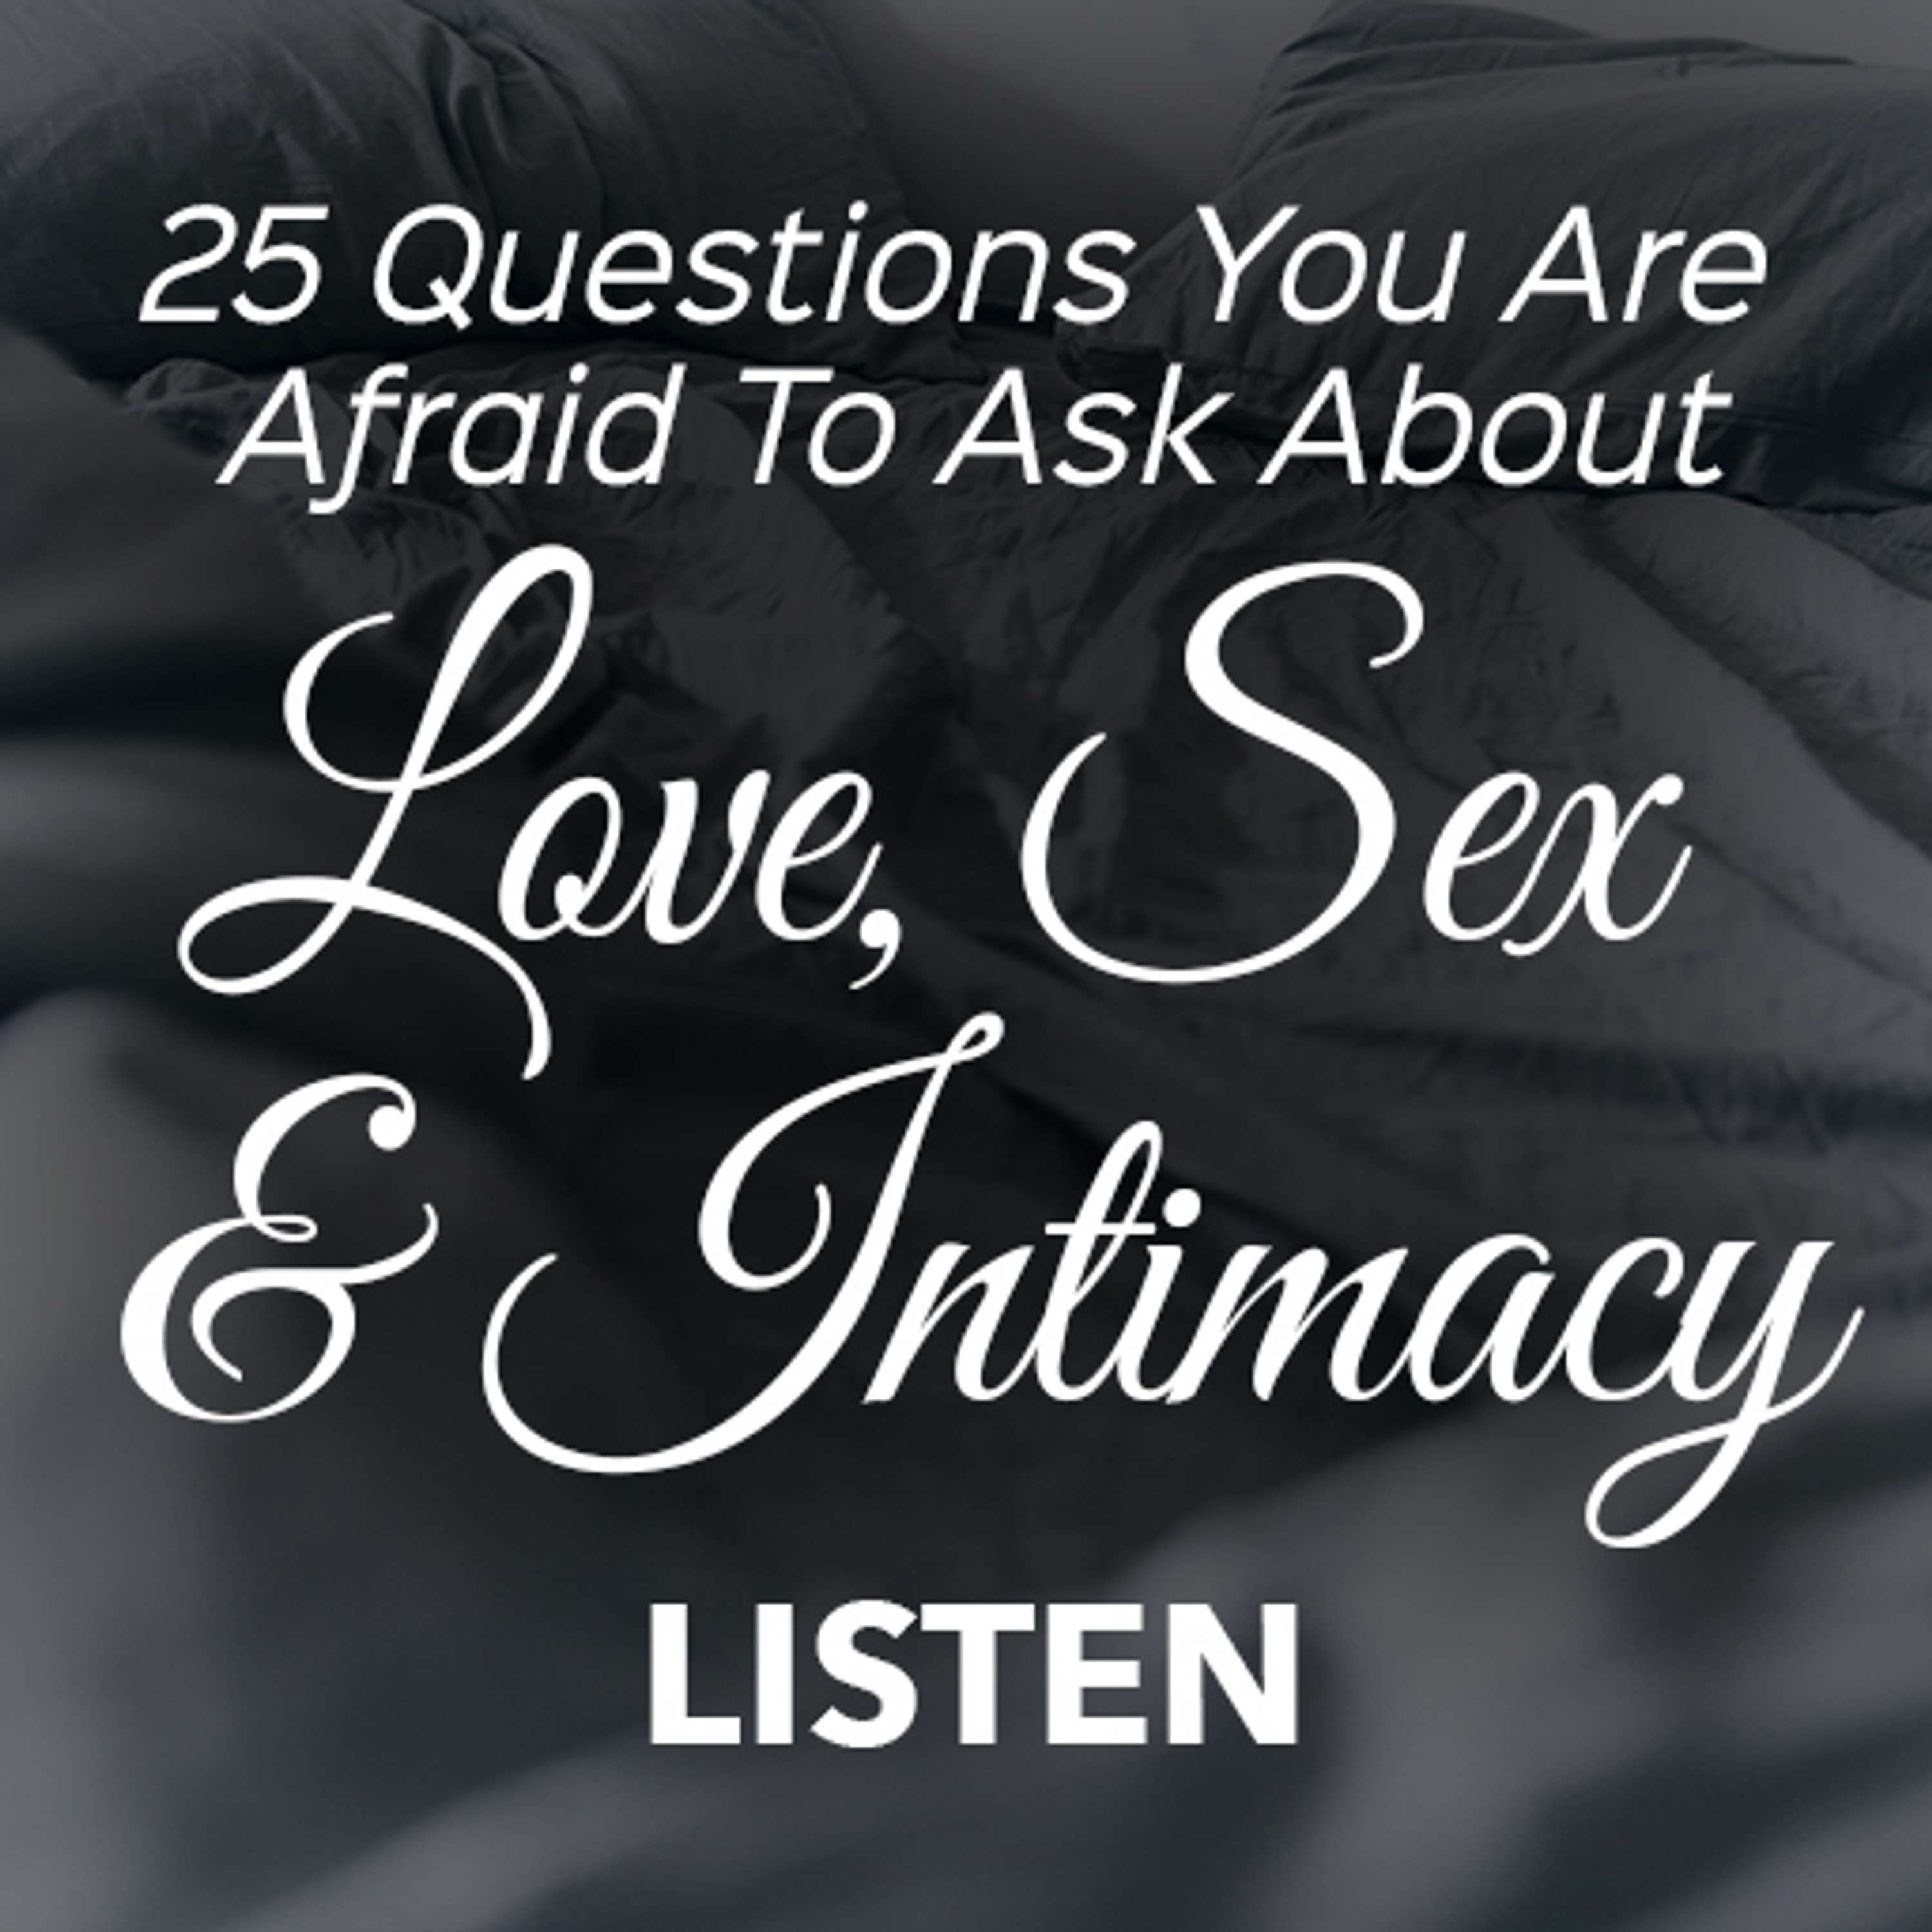 25 Questions You Are Afraid to Ask About Love, Sex and Intimacy (Part 1) - Juli Slattery